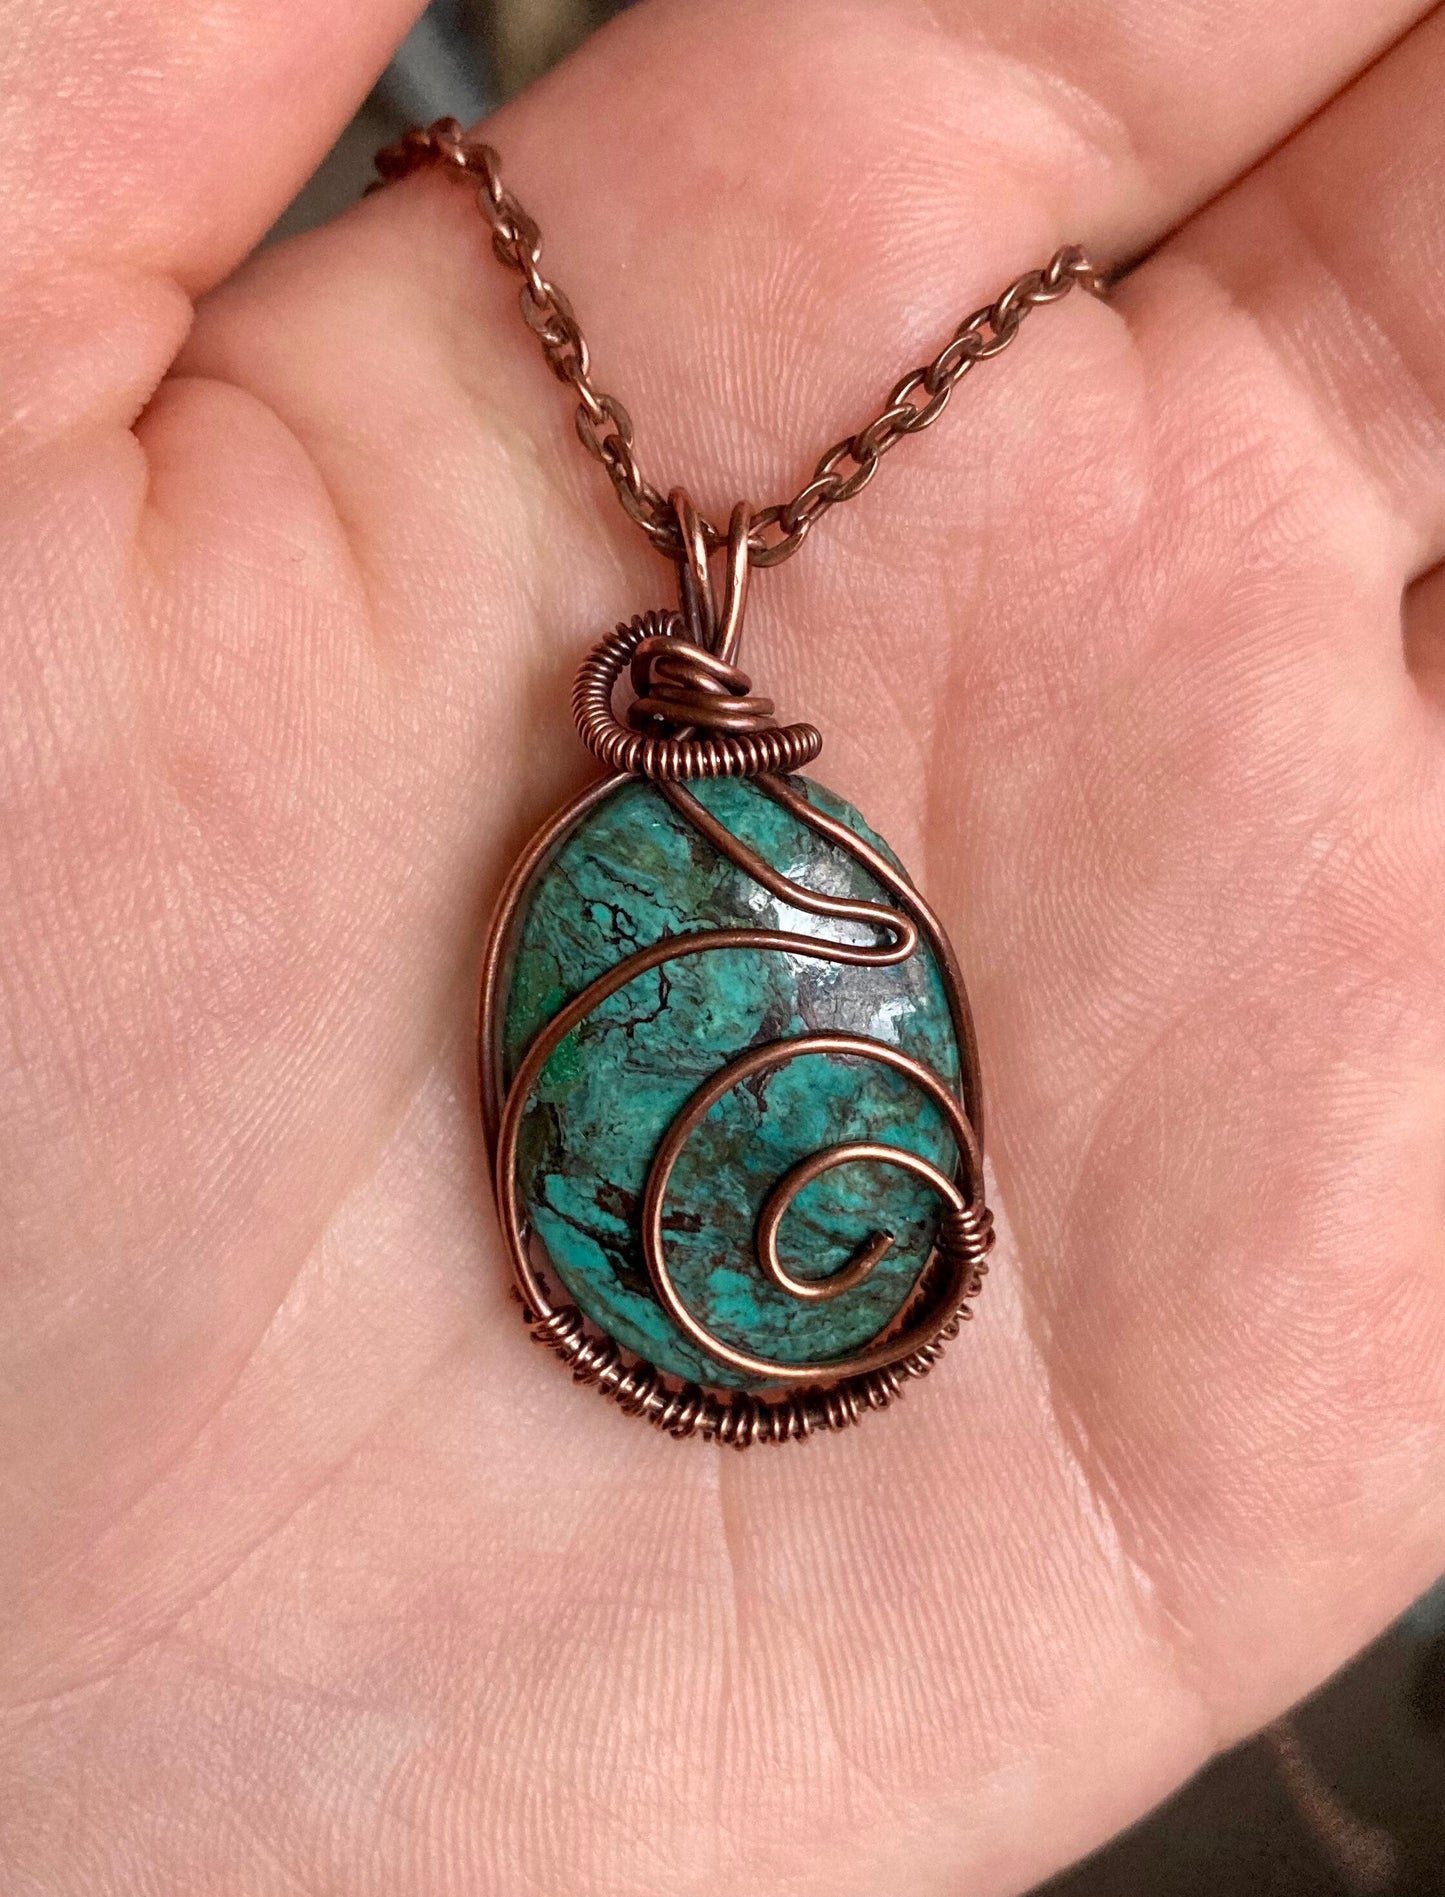 Tibetan turquoise pendant handmade necklace wire wrapped natural stone with 18 inch length chain